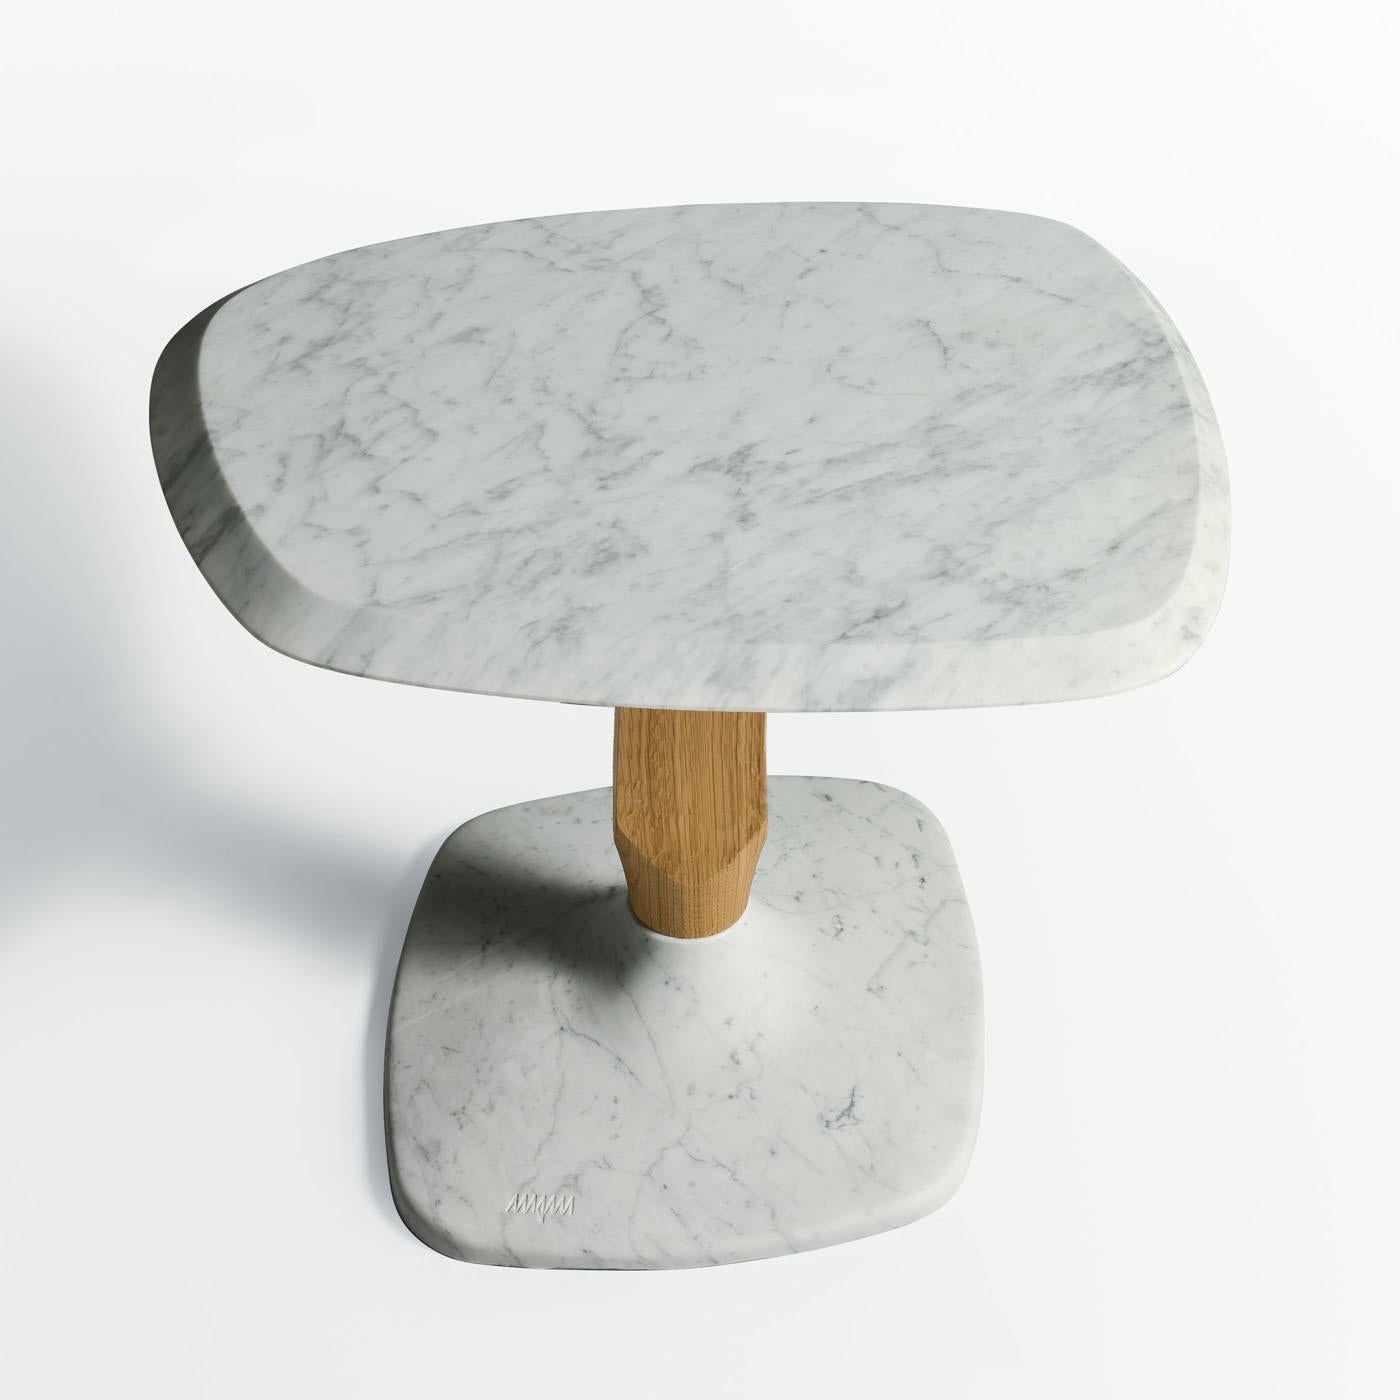 Part of the Bisel collection, a series of tables that combine hand-craftsmanship and innovative techniques to create timeless pieces, this side table was designed by Paolo Salvadè. The base and top, with elegantly round corners and beveled edges,